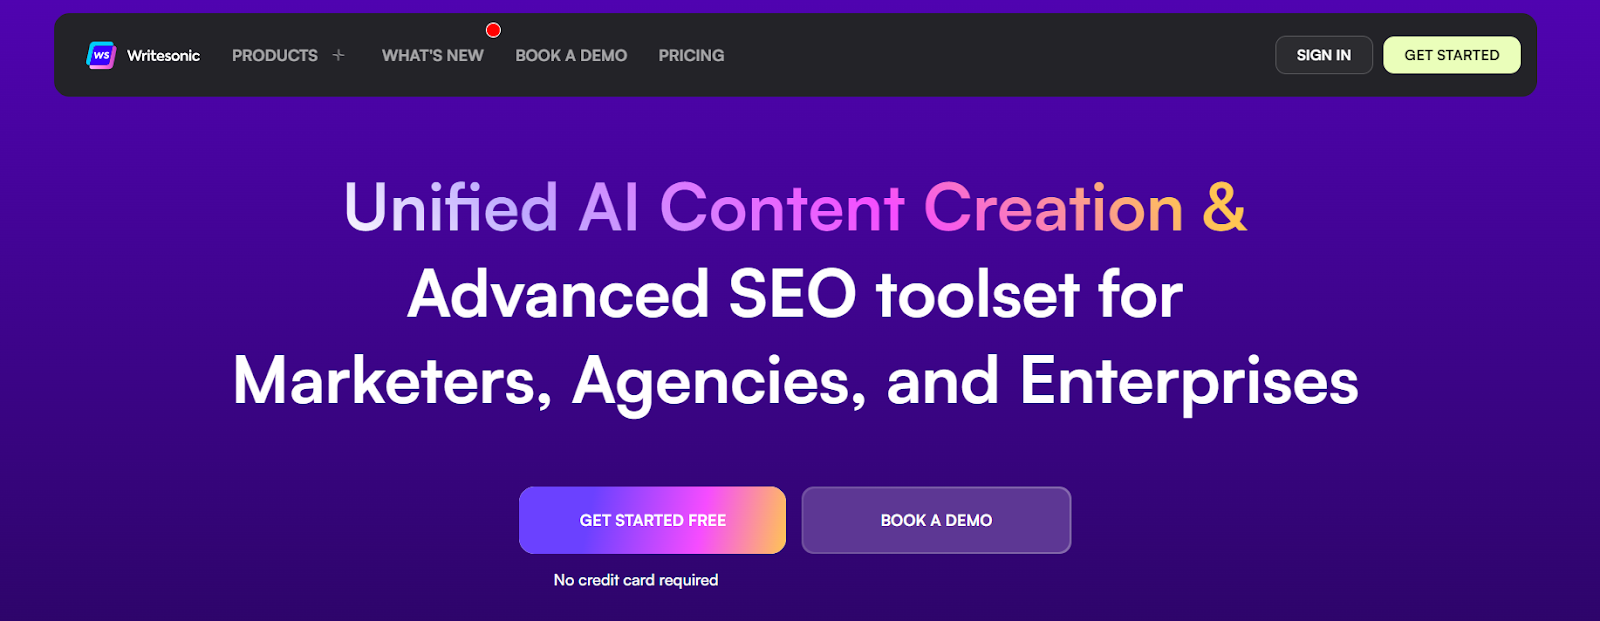 15 Content Marketing Tools to Boost Online Visiblity